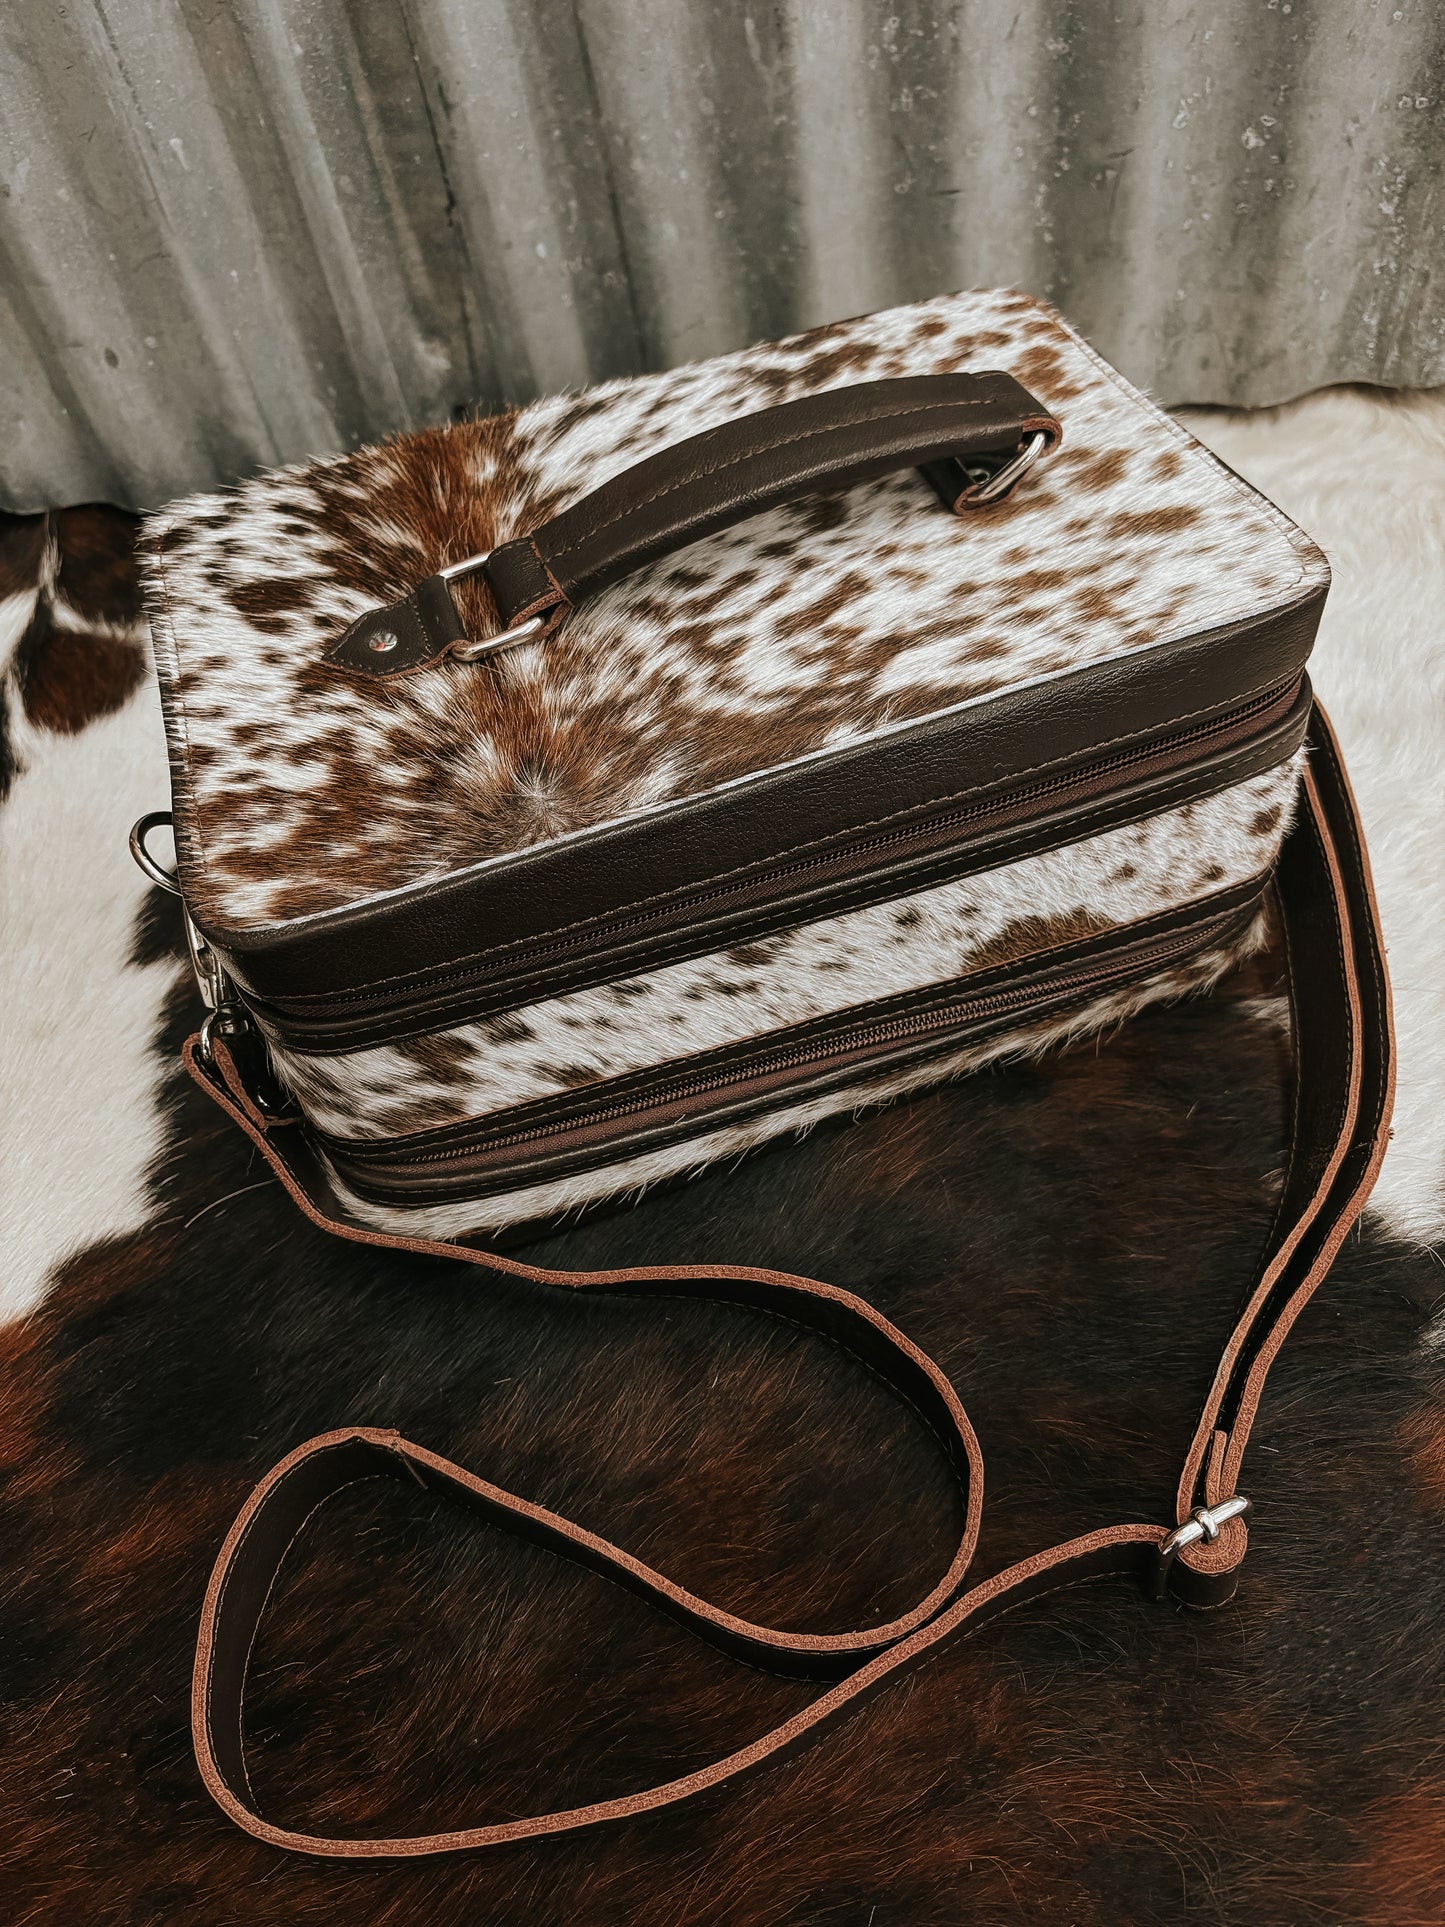 The Cowhide Double Decker Jewelry Traveling Case/Carrier